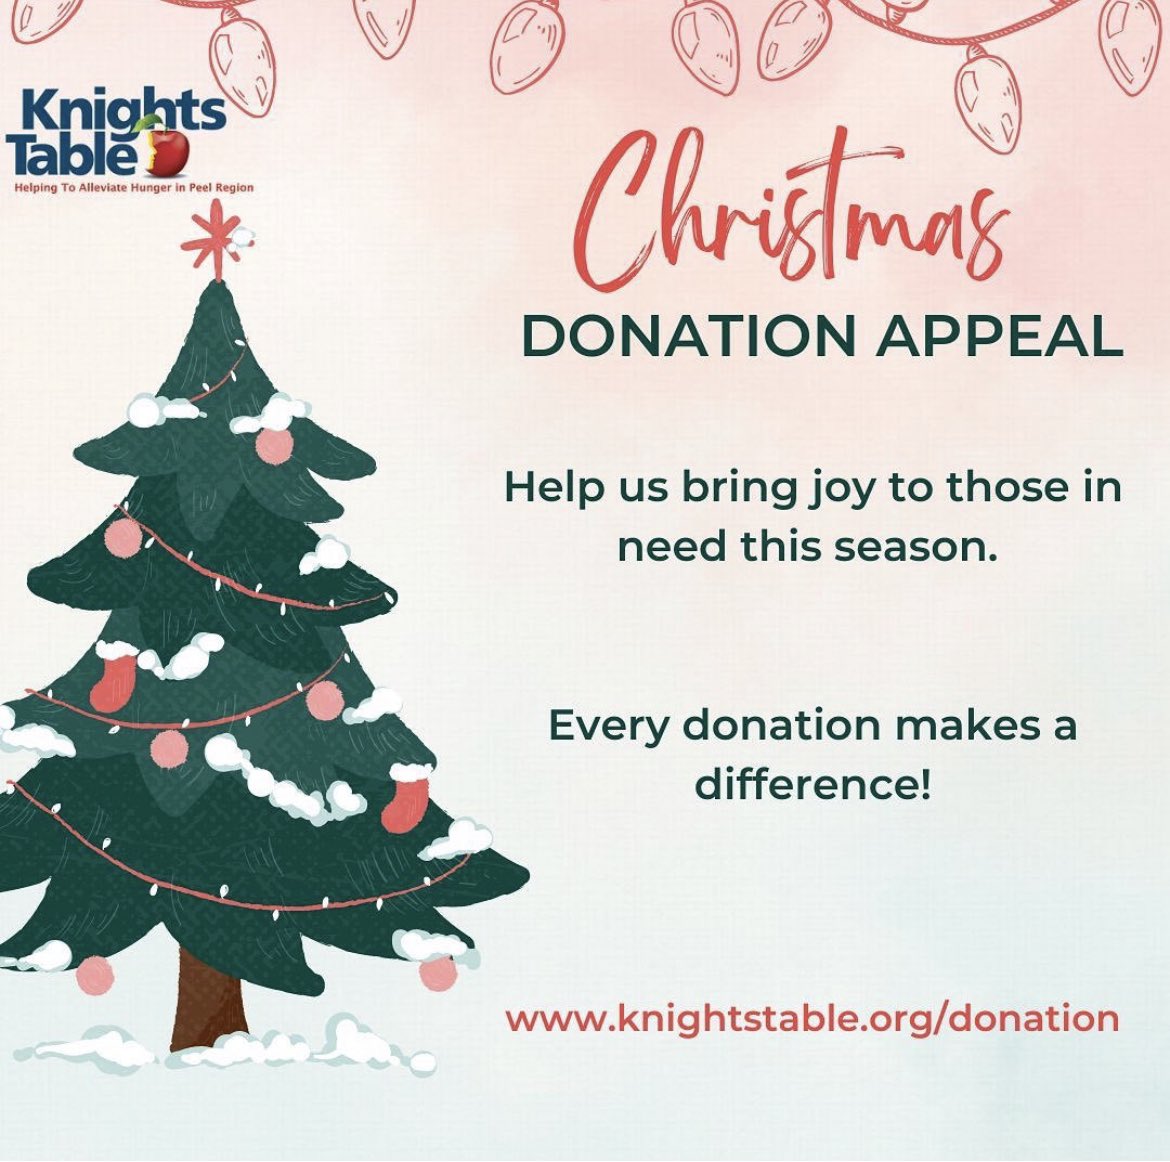 With the rise in inflation and limited support, more and more people are turning to food banks and soup kitchens this season. Help us spread joy by providing your neighbour in need with food and meal support. Donate now! Visit knightstable.org/donation